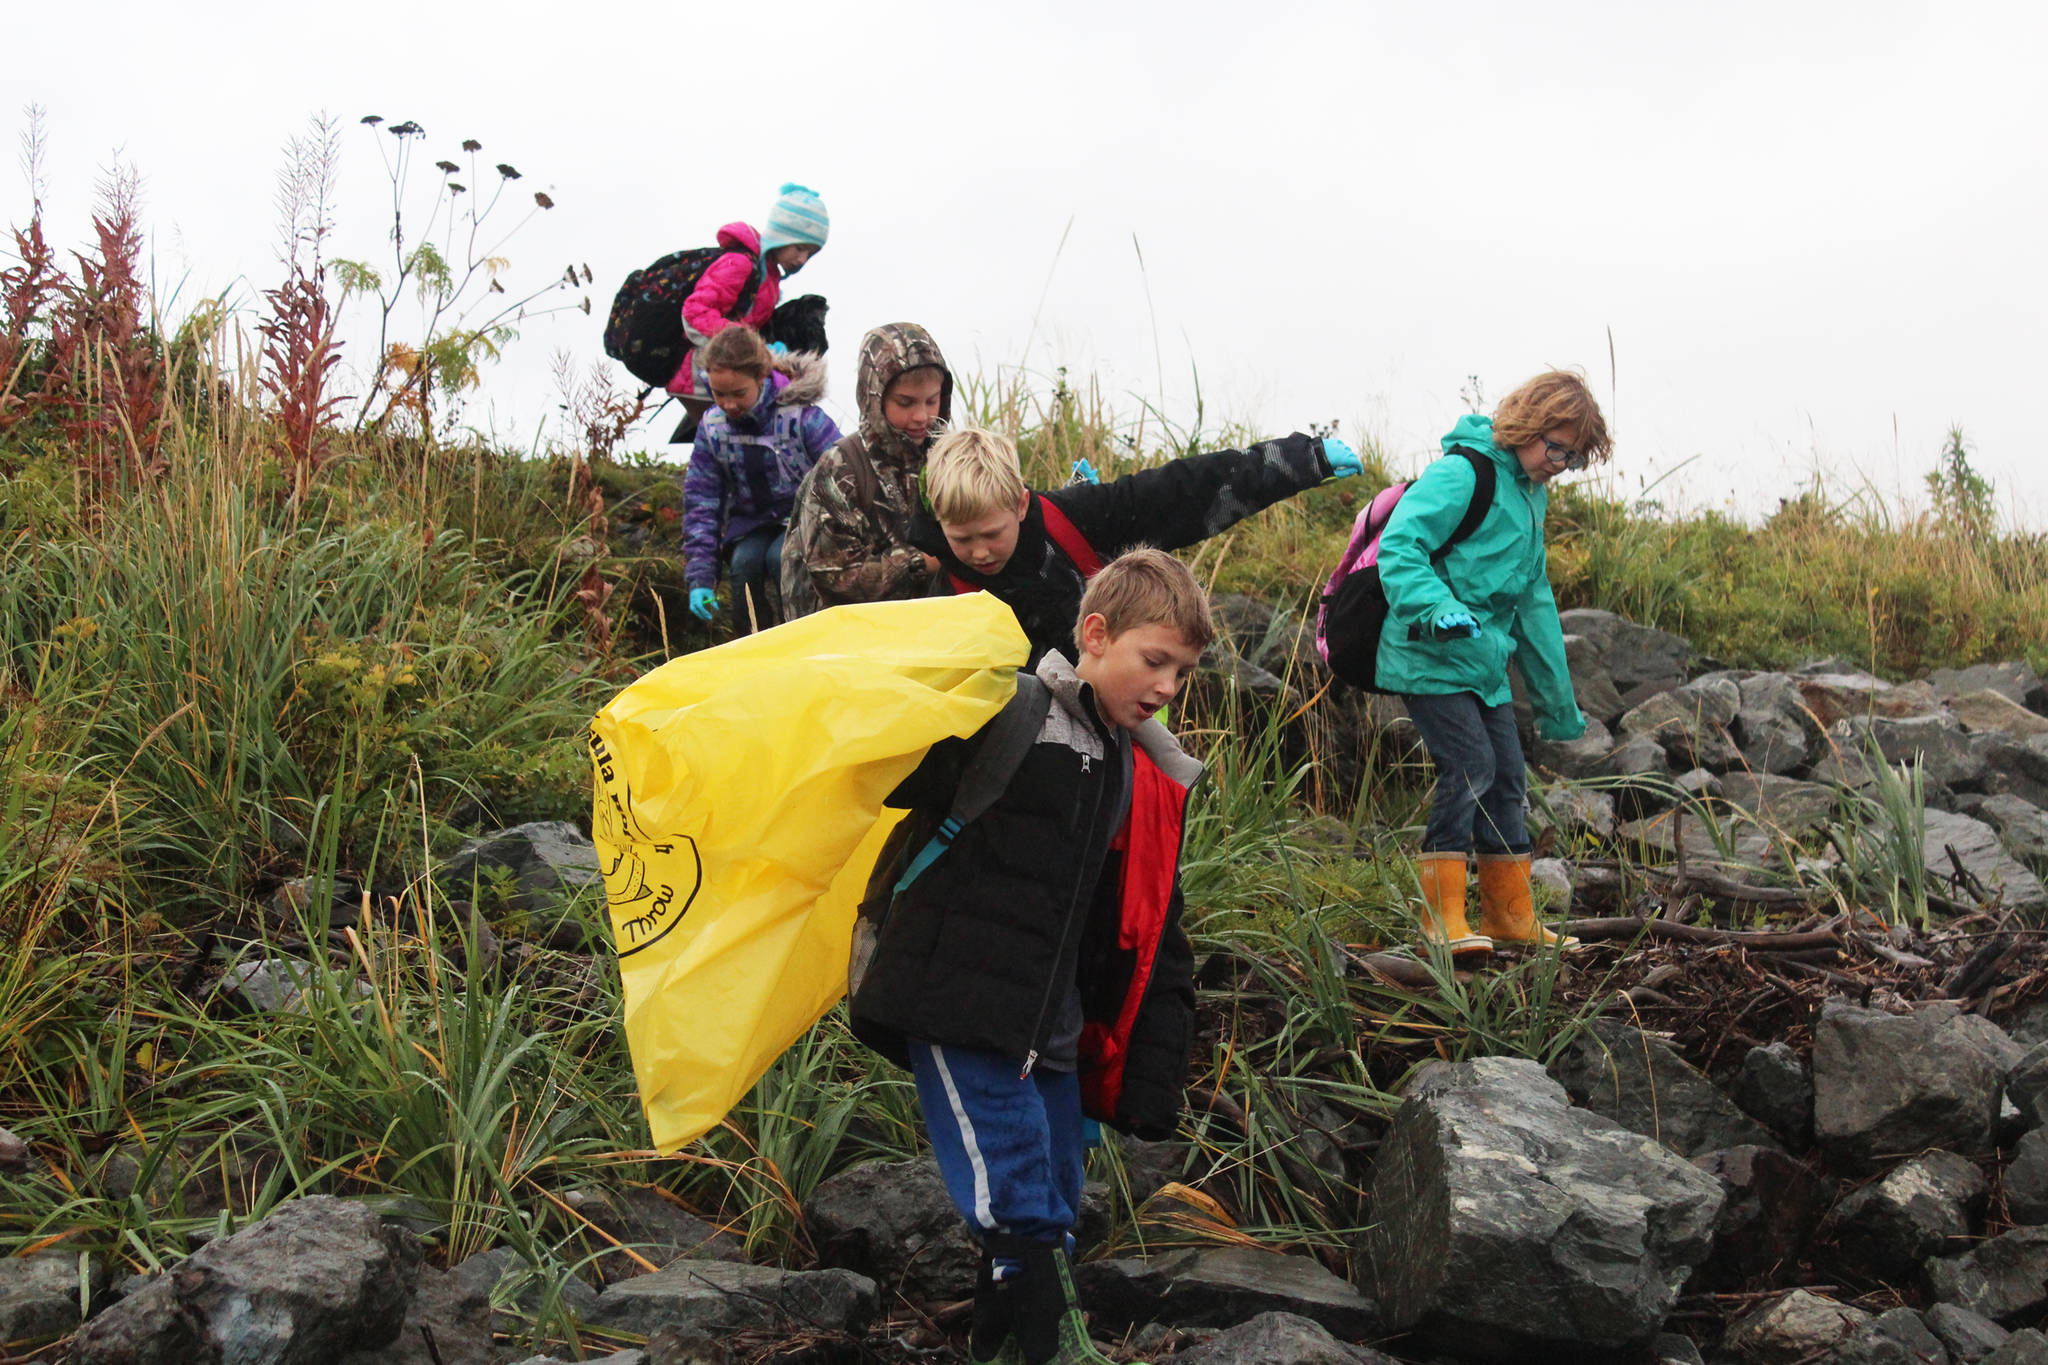 Fourth grade students from McNeil Canyon Elementary School descend to the shoreline from Spit Road to clear away trash Friday, Sept. 22, 2017 near Mariner Park in Homer, Alaska. Each year, citizen groups and students from area schools can adopt a section of Kachemak Bay shoreline where they clean debris and observe changes for the Kachemak Bay CoastWalk, hosted by the Center for Alaskan Coastal Studies. (Photo by Megan Pacer/Homer News)